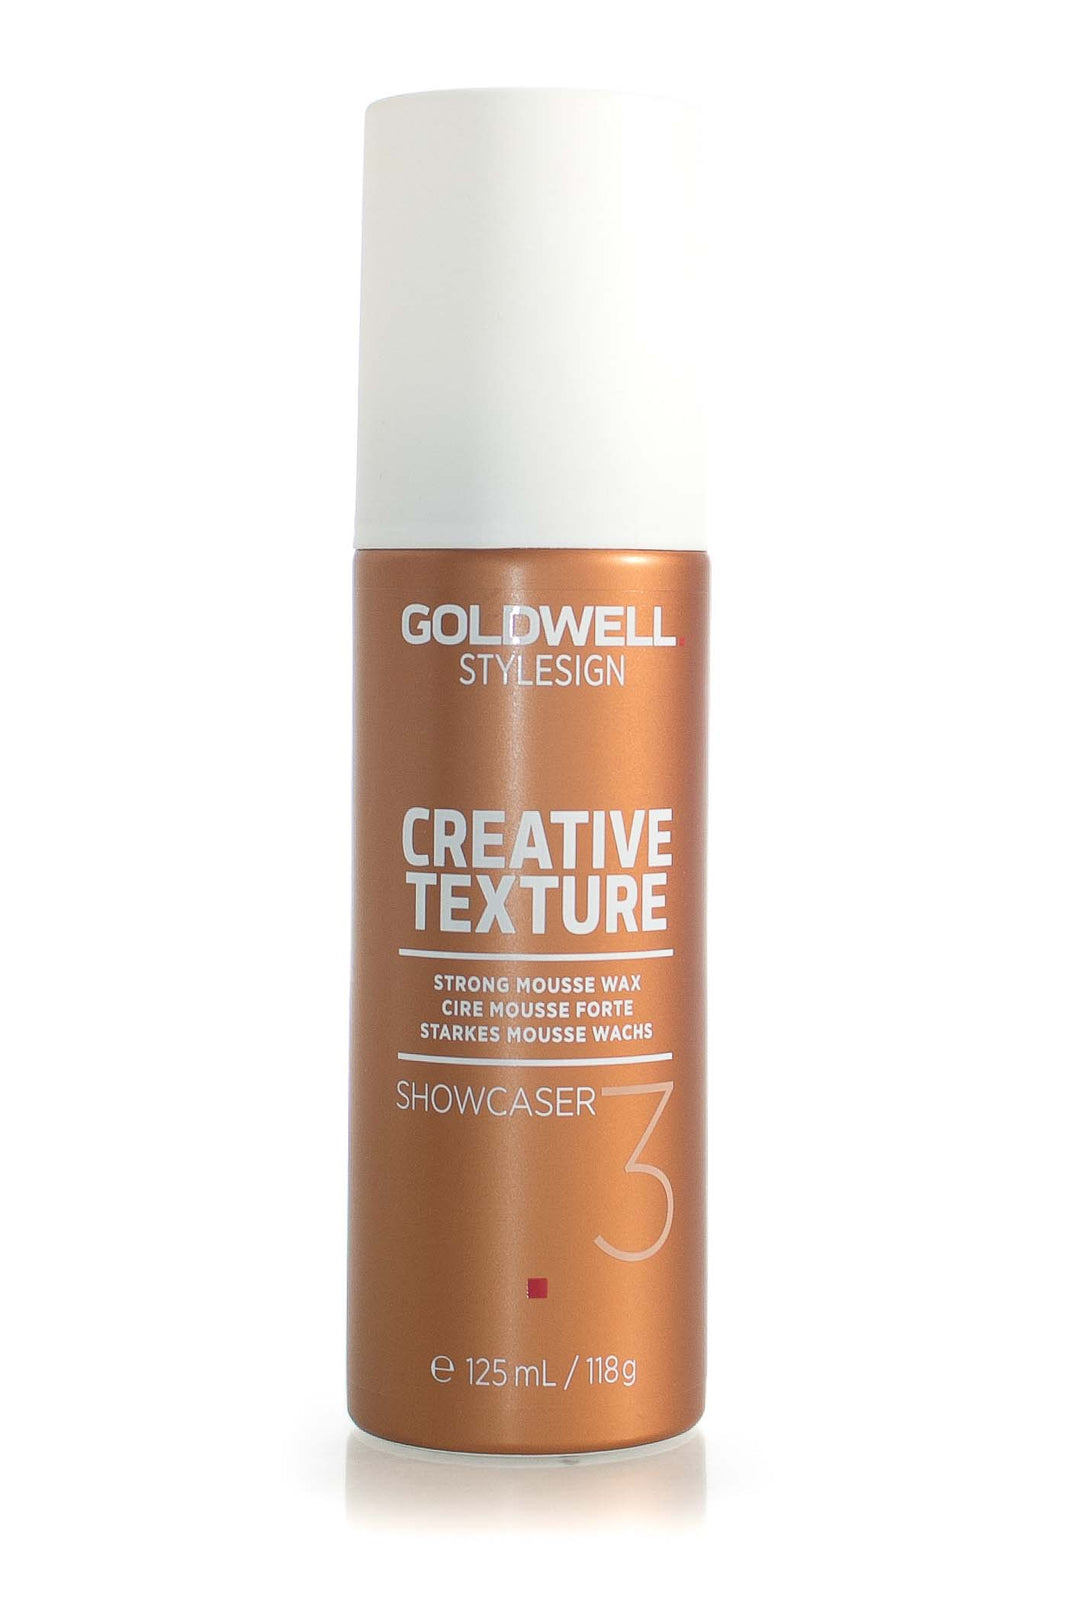 Product Image: Goldwell Creative Texture Showcaser - 125ml